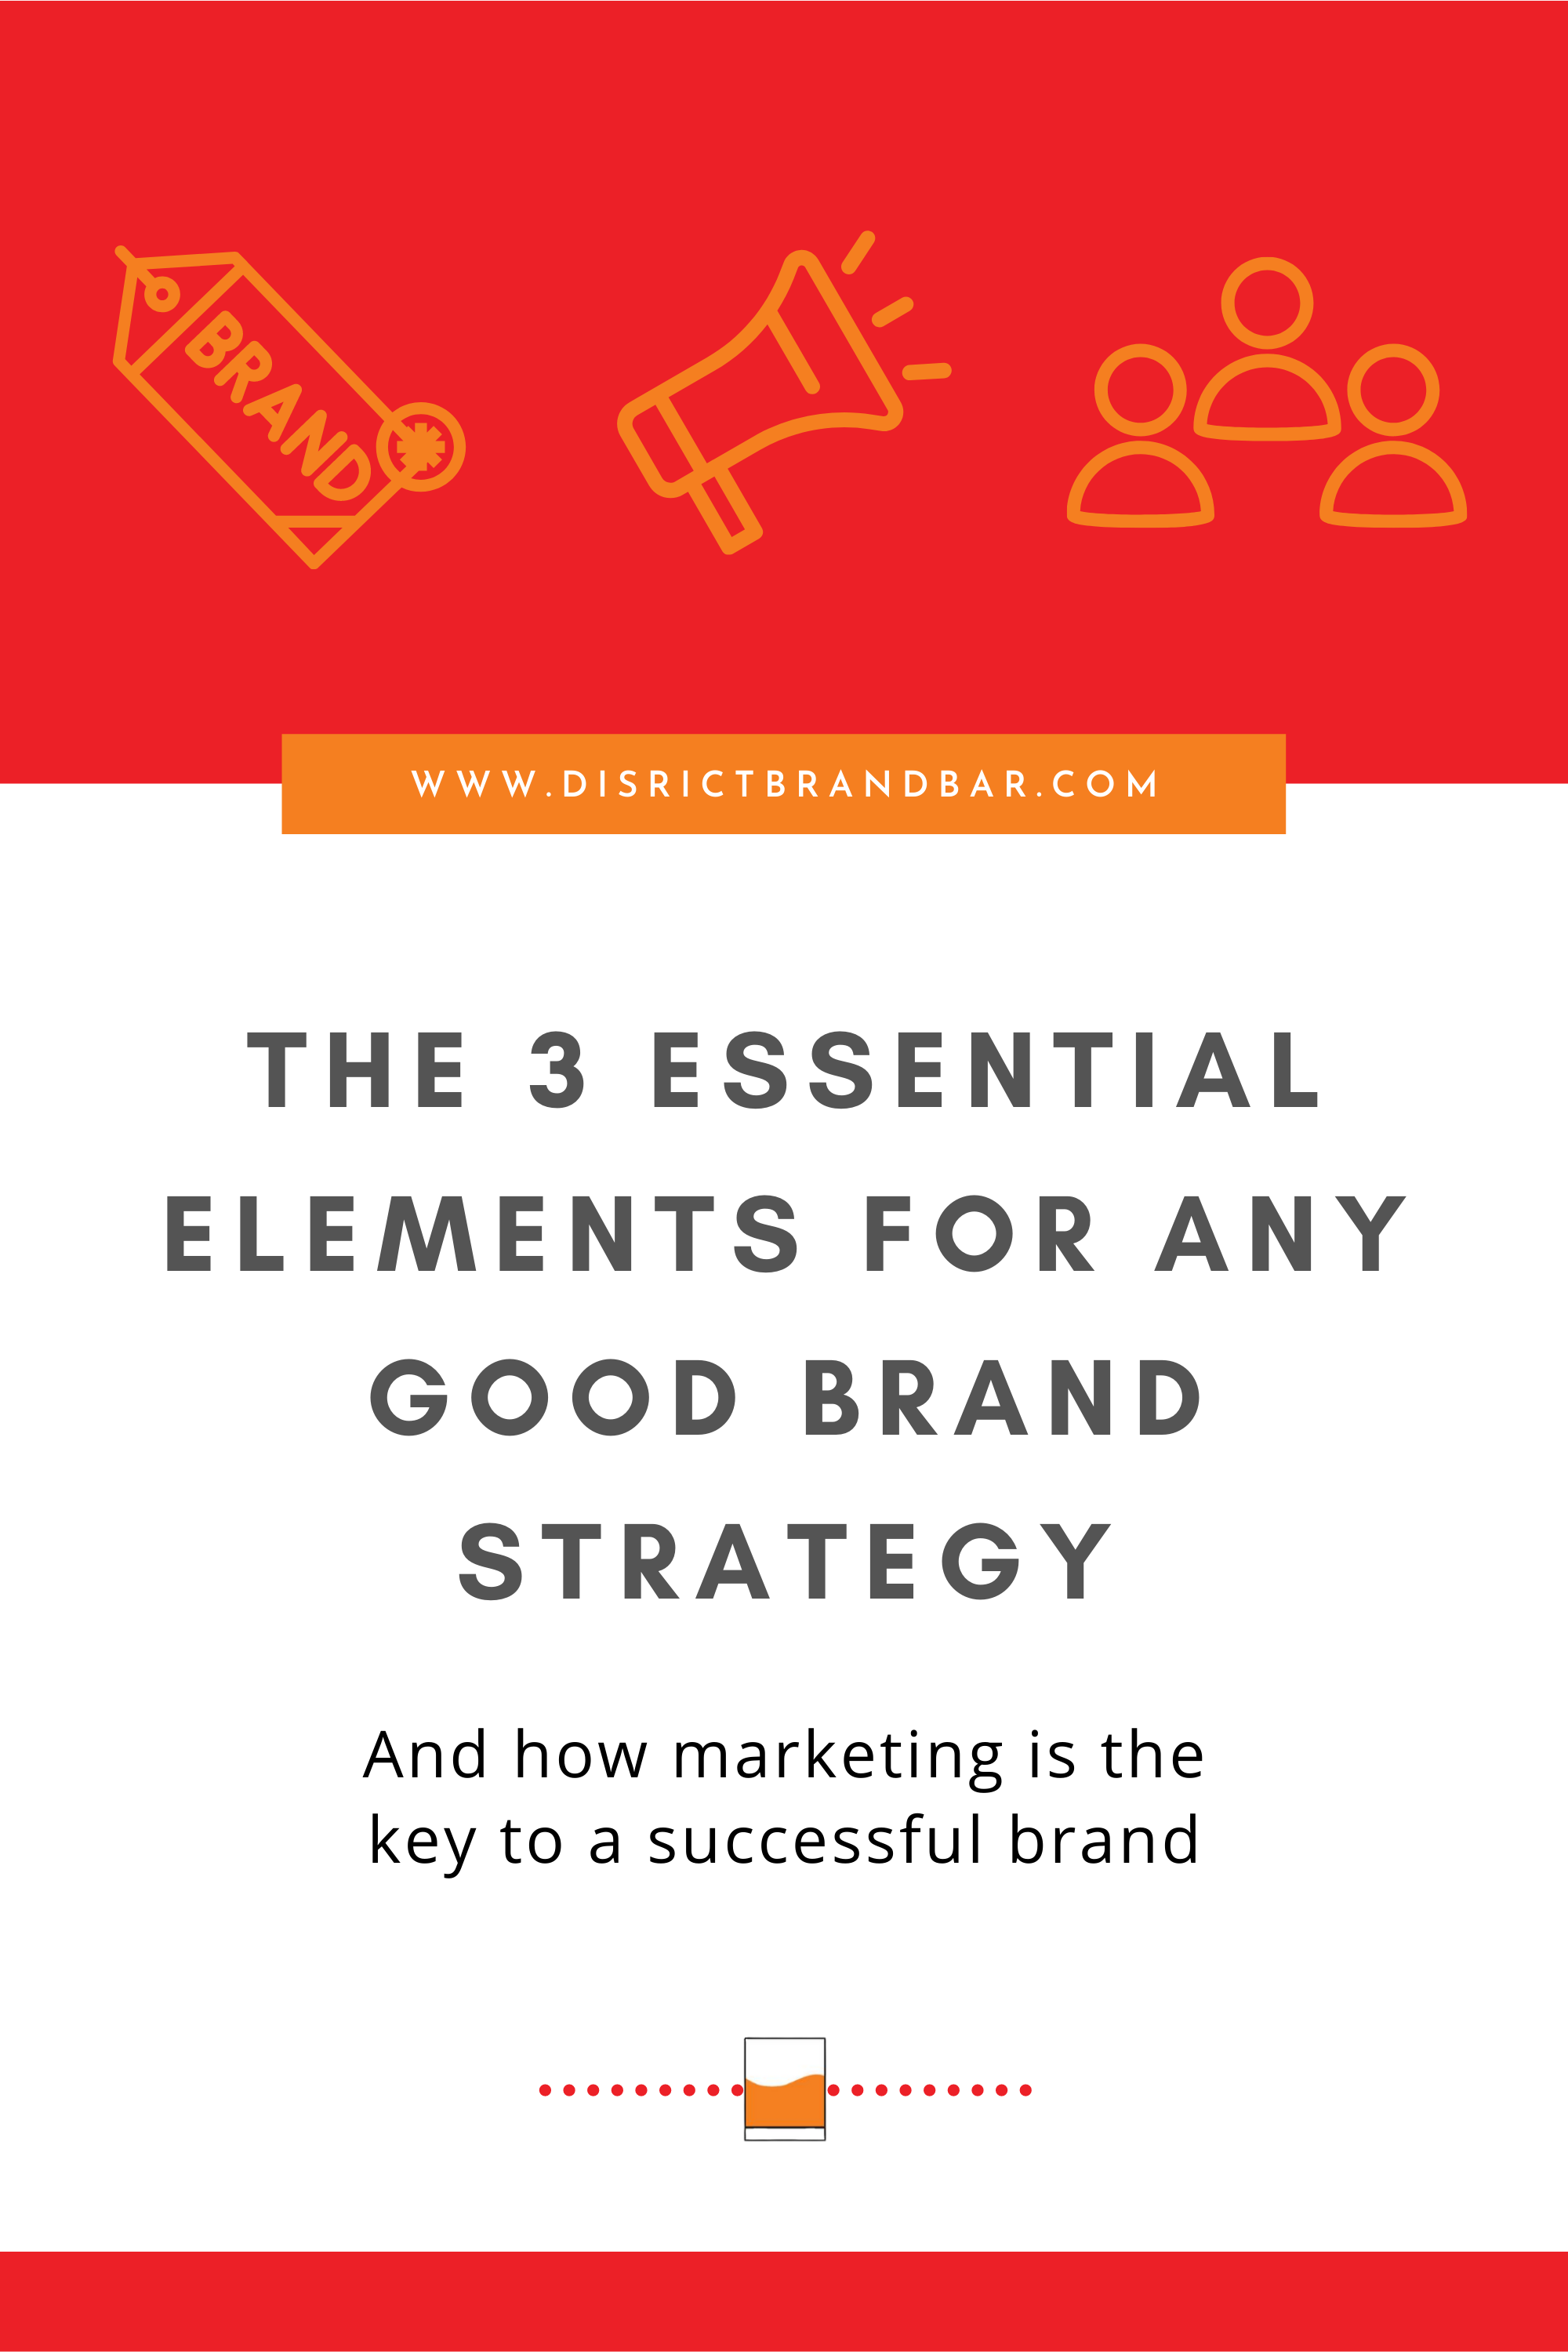 The 3 Essential Elements for Any Good Brand Strategy